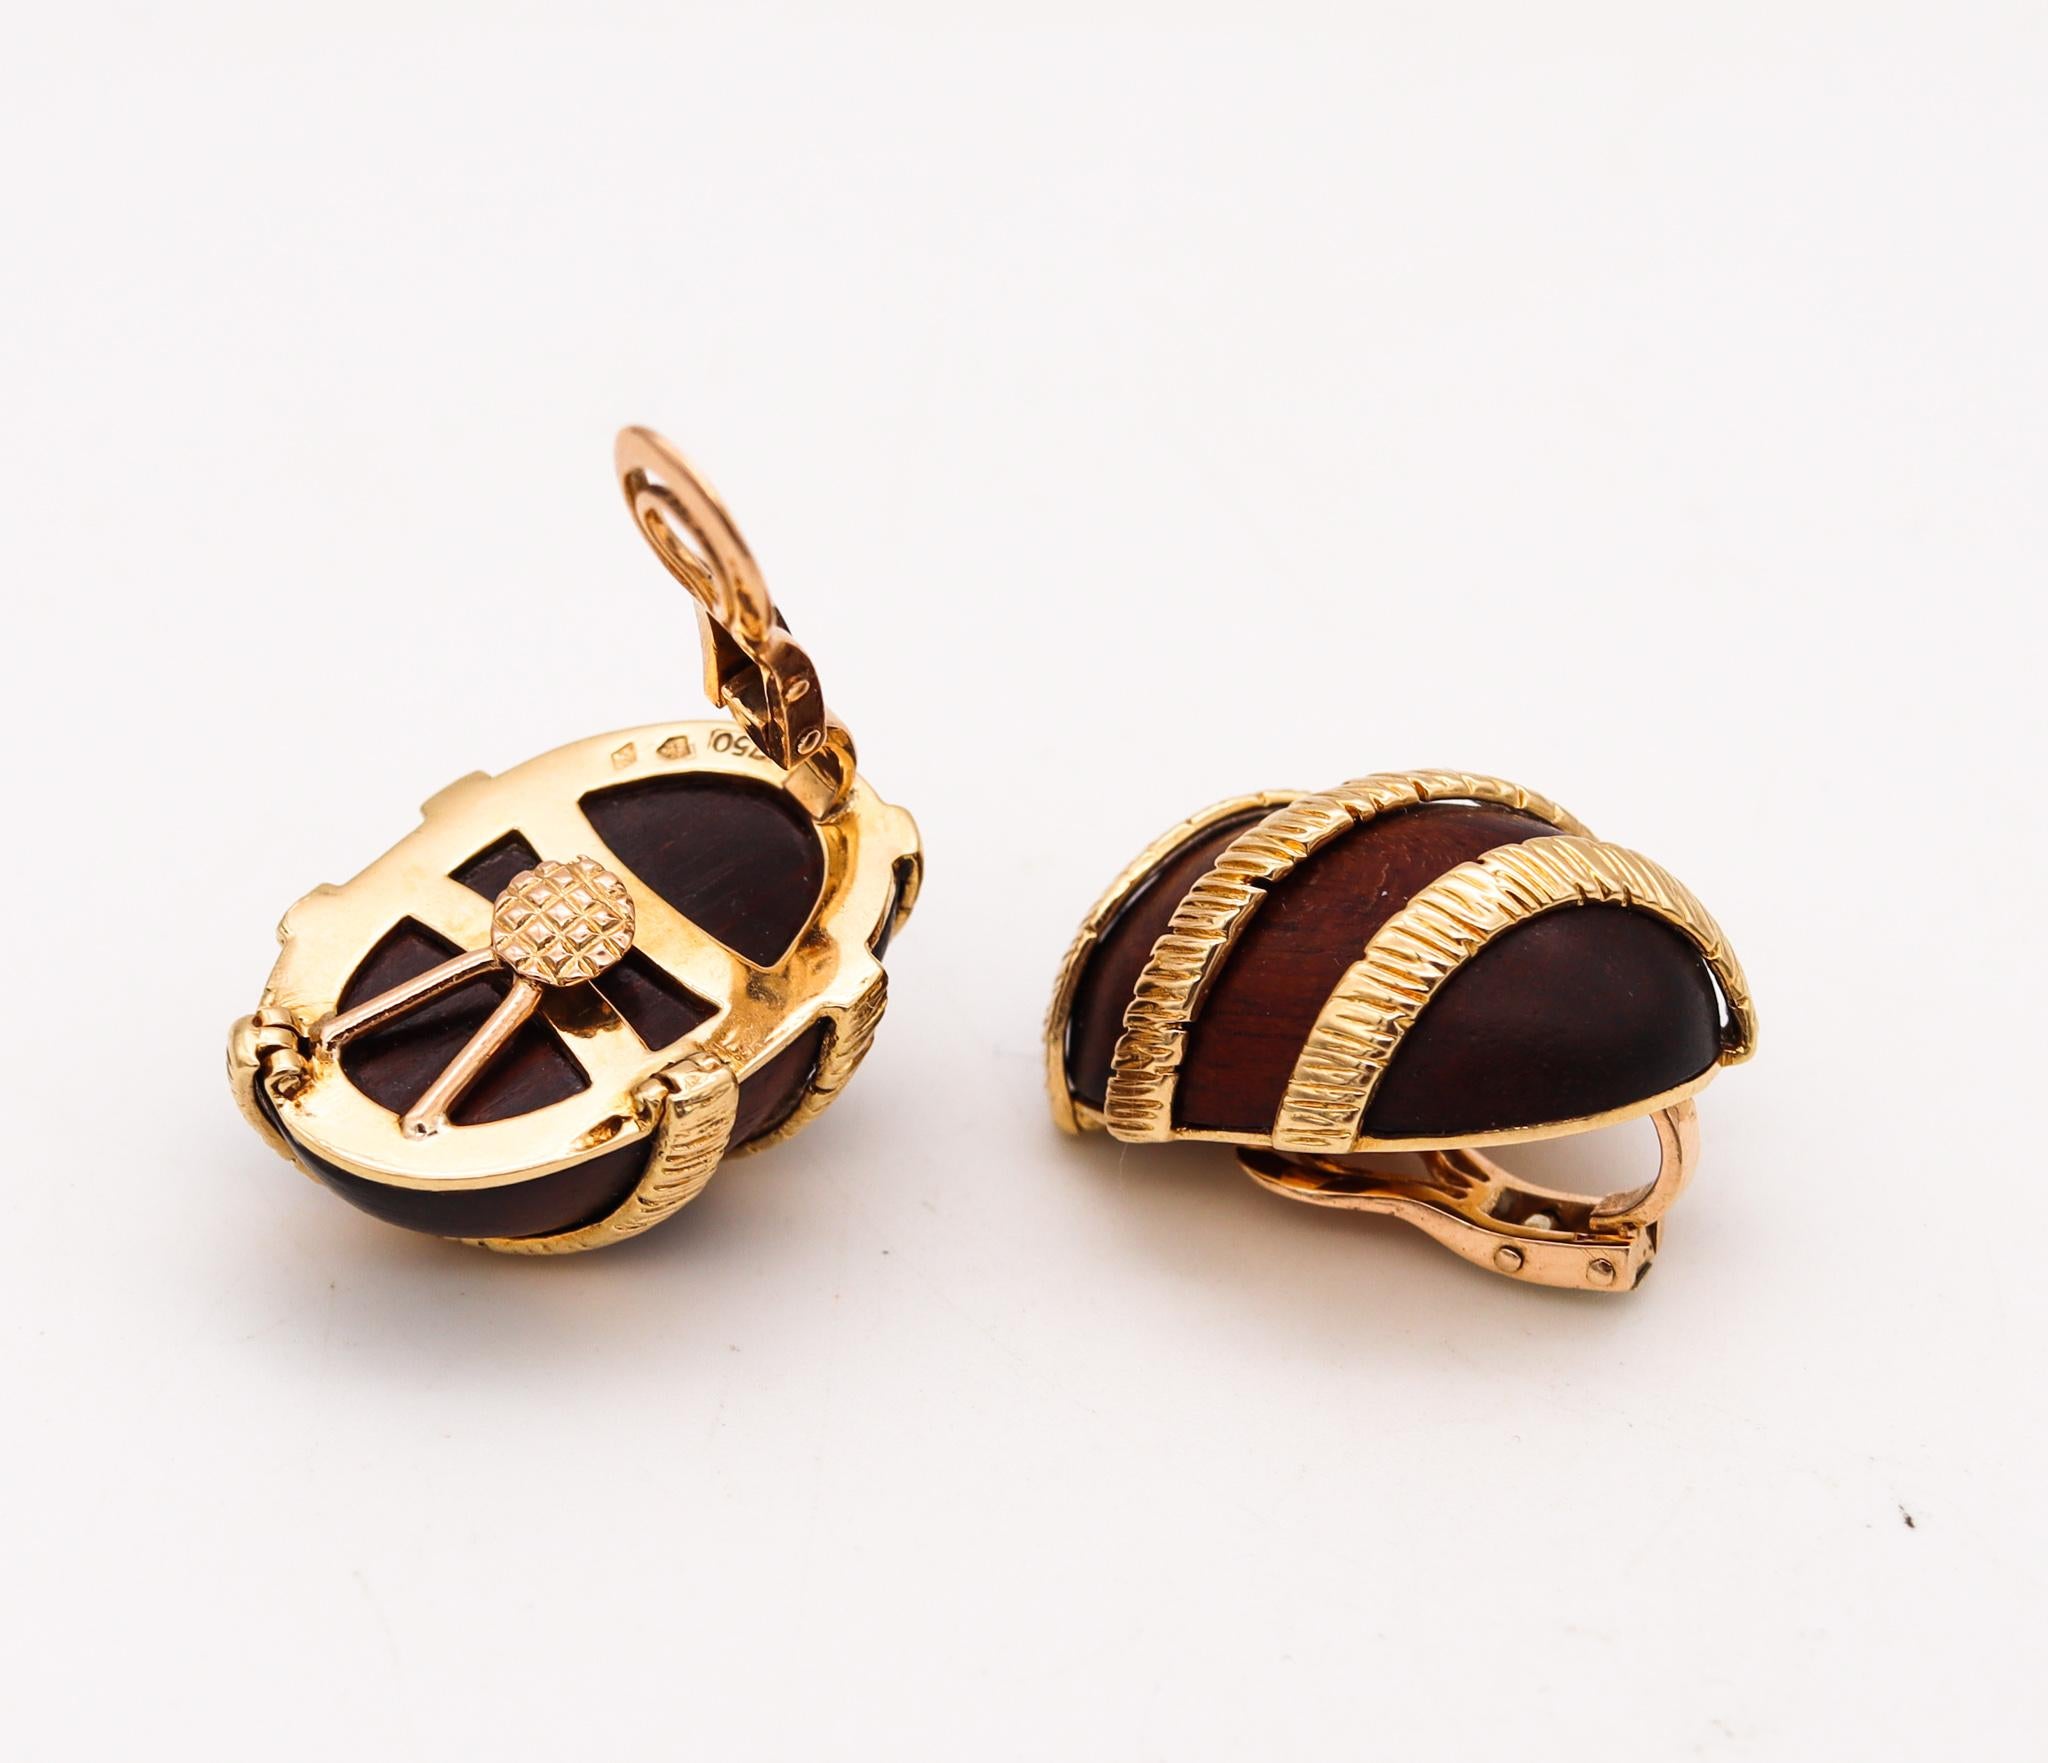 Cartier Paris 1970 Very Rare Earrings in Textured 18Kt Gold and Carved Rose Wood In Excellent Condition For Sale In Miami, FL